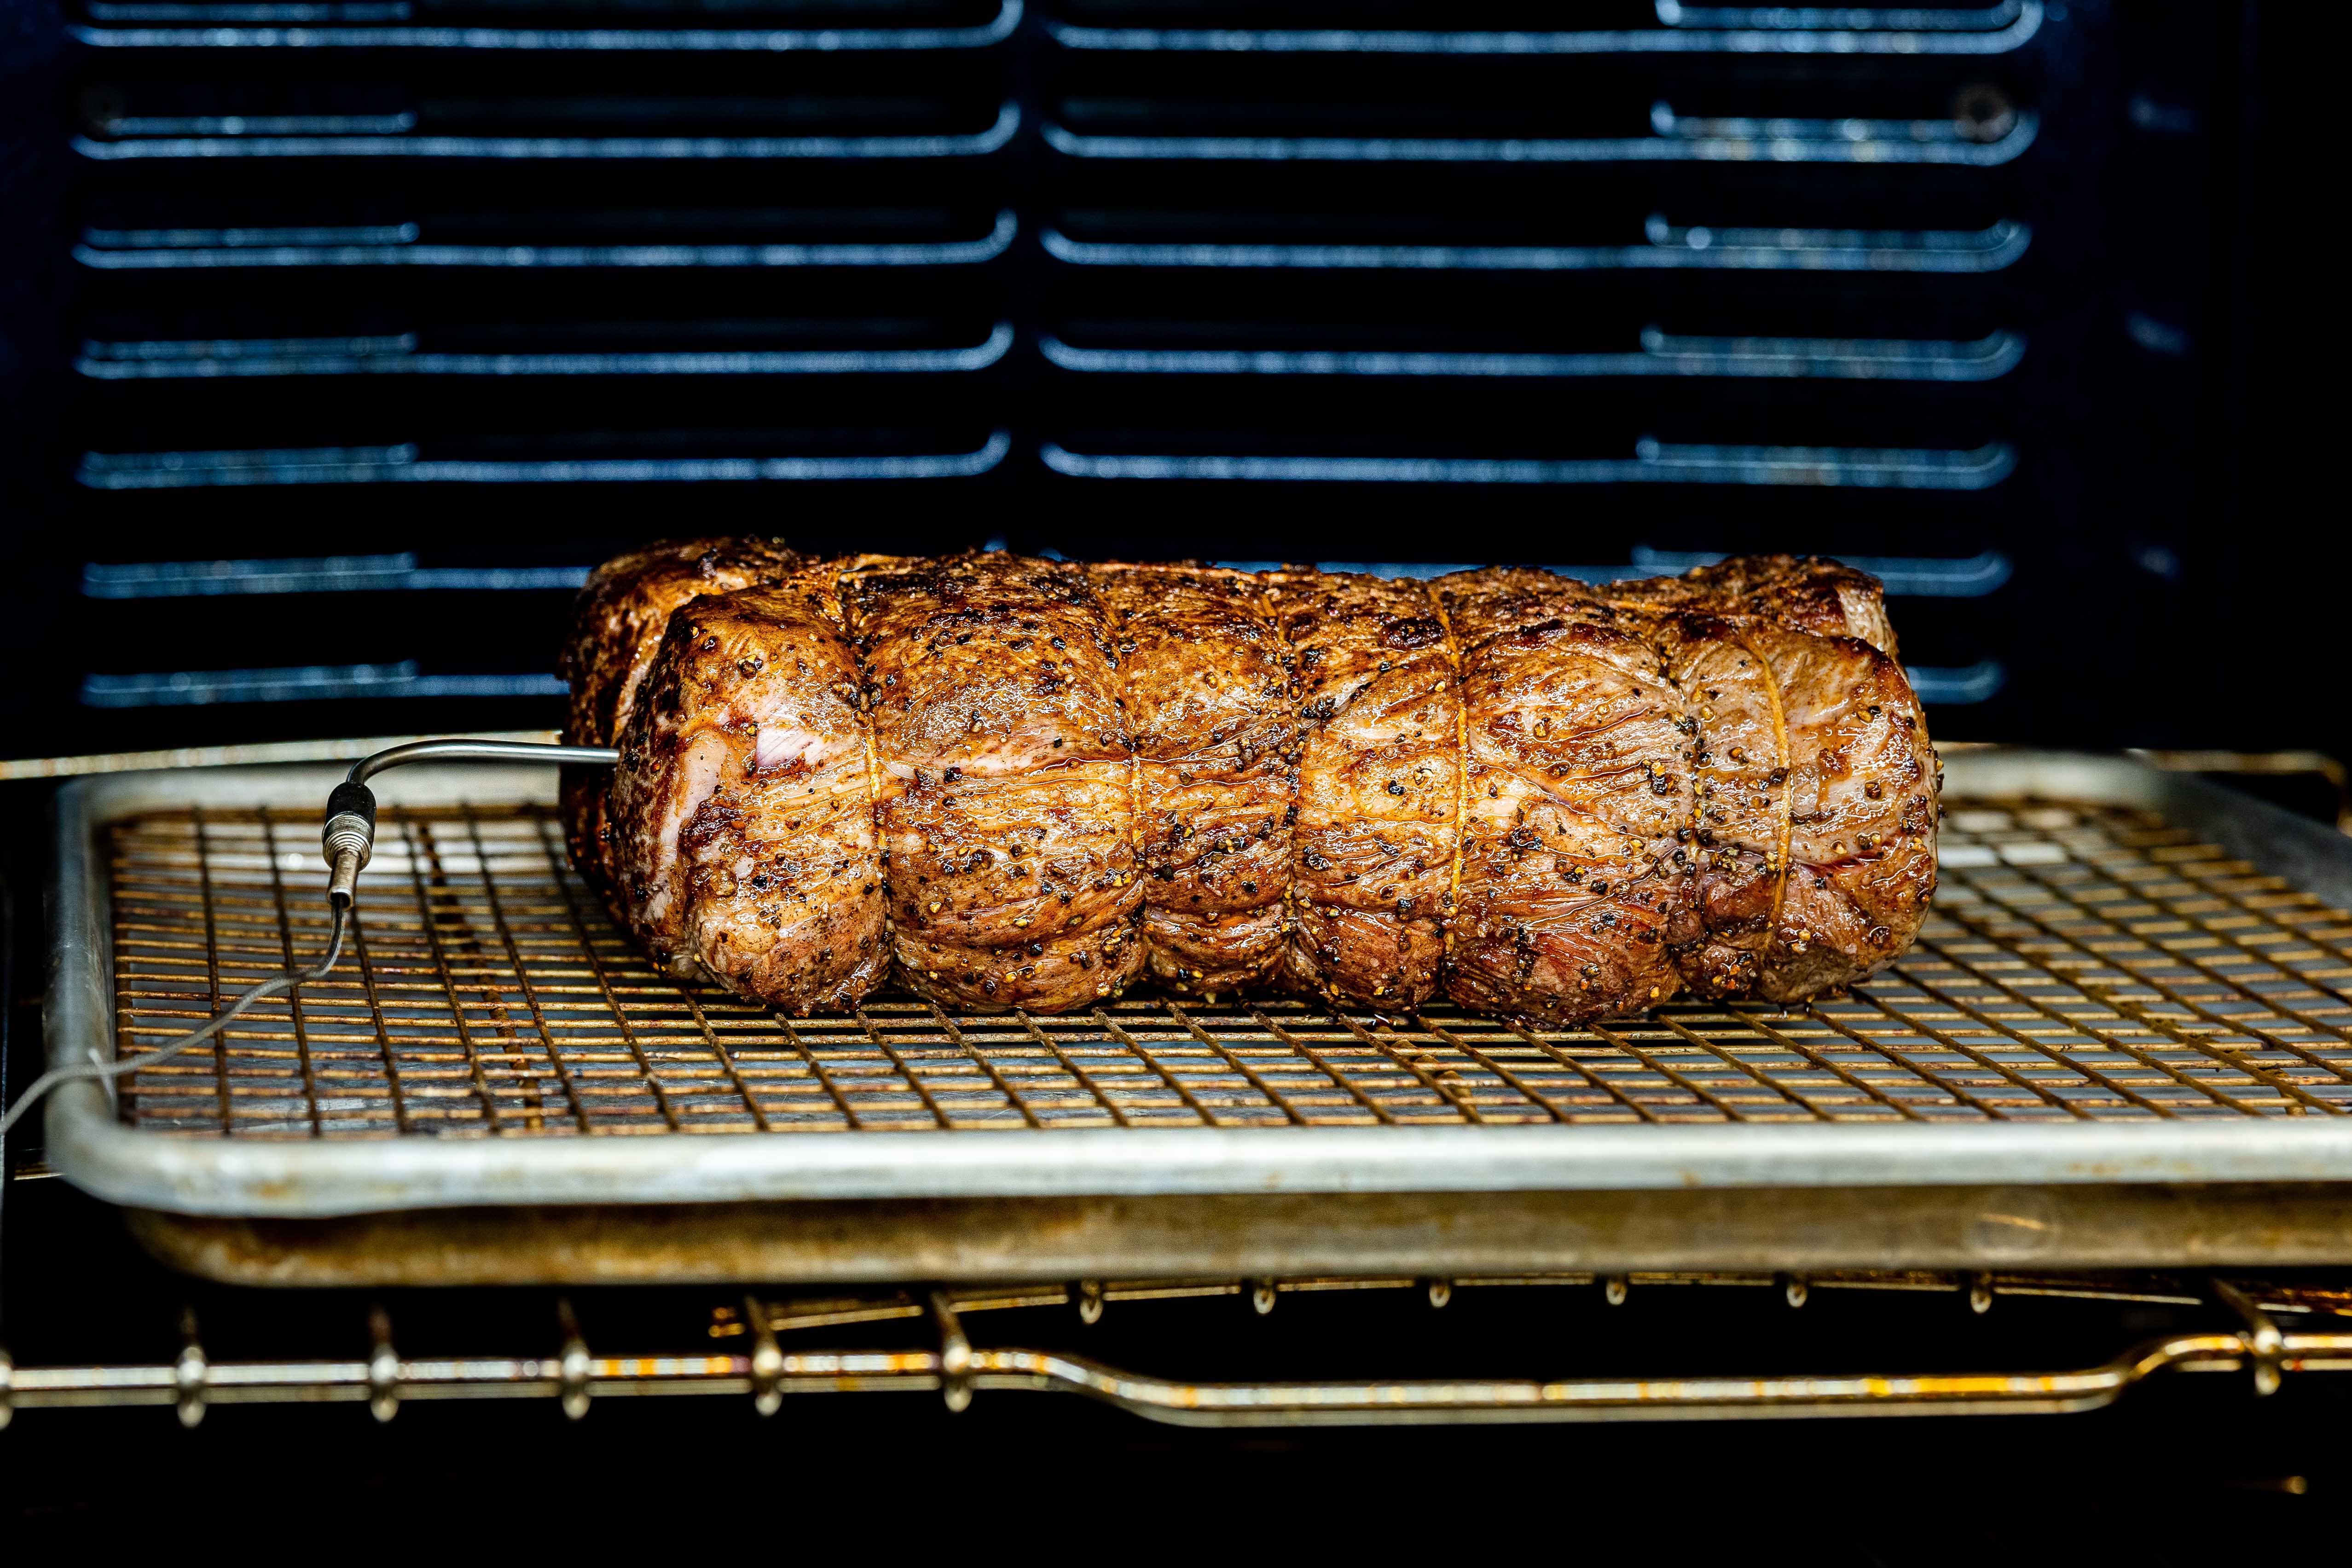 Roasting the eye of rib in the oven at 250°F